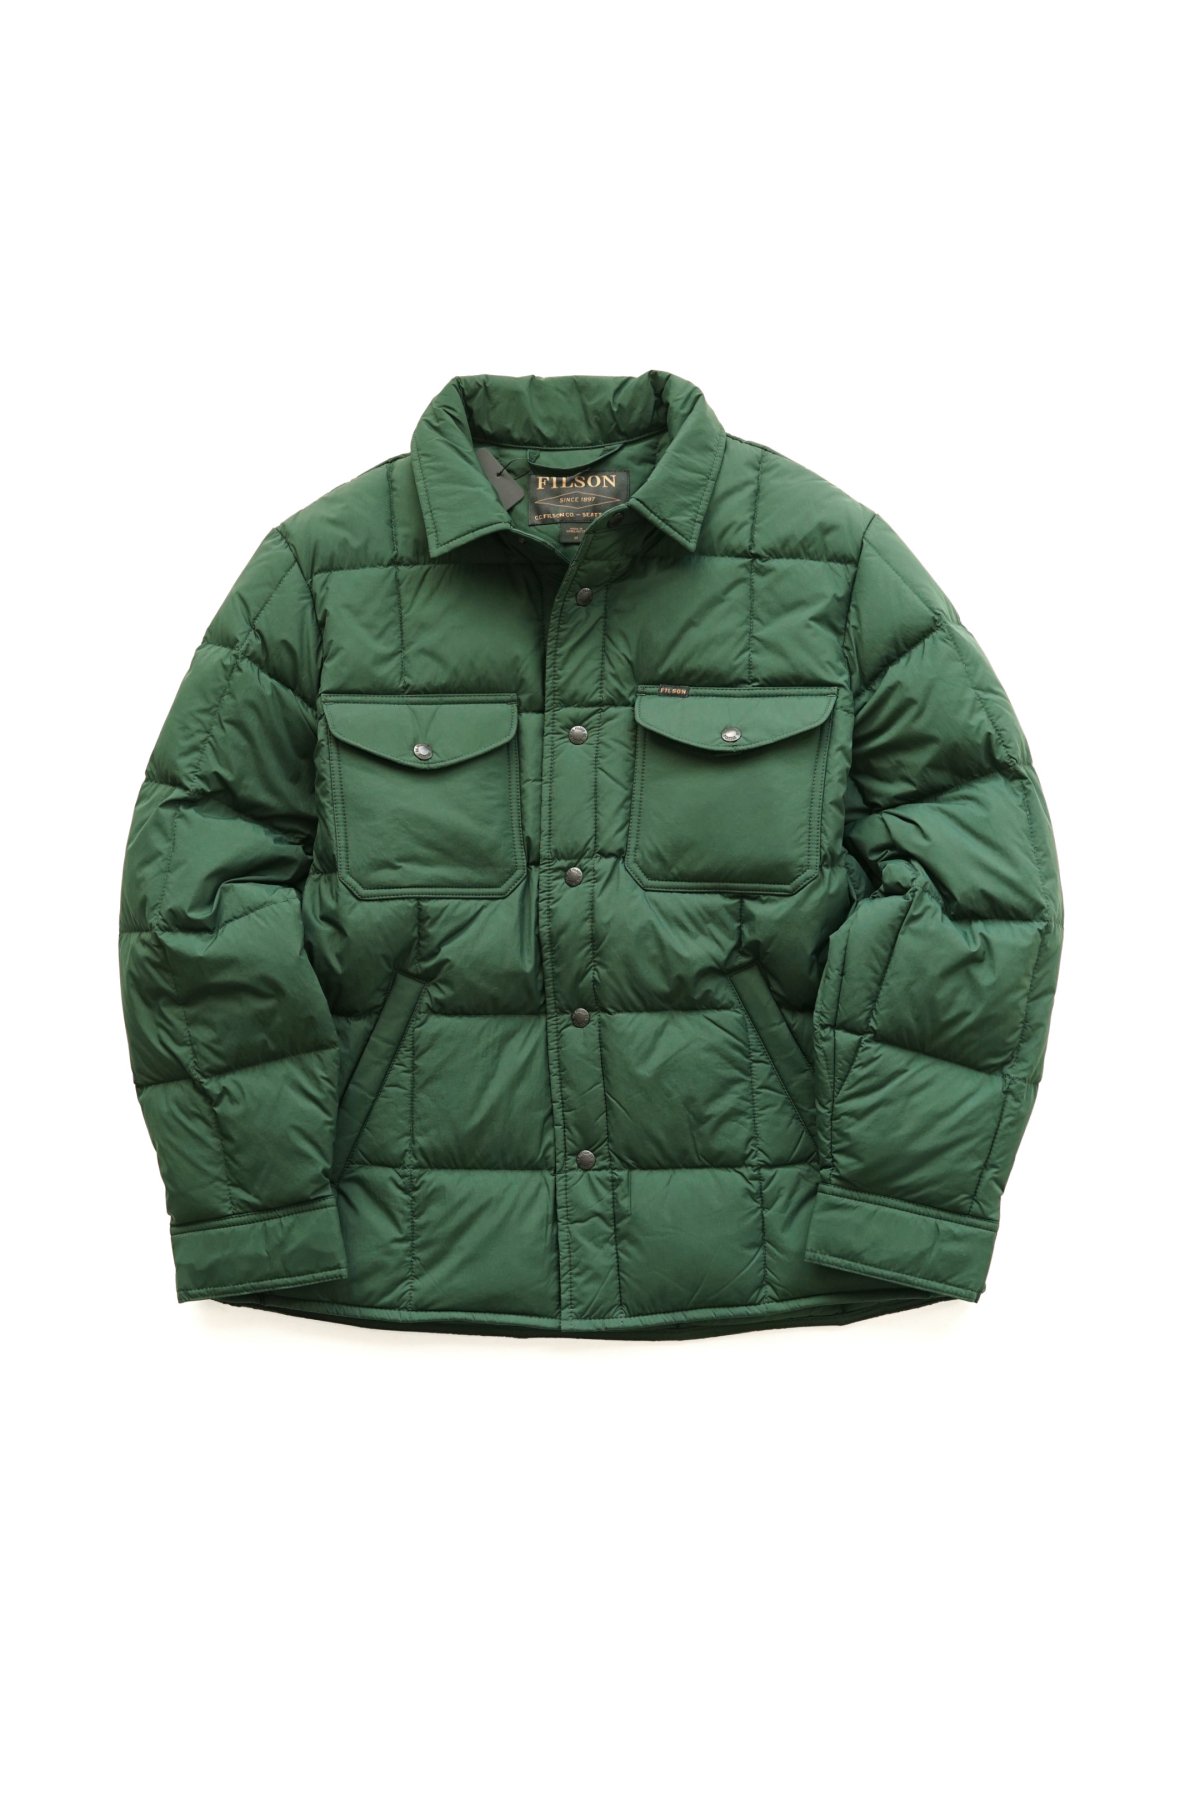 FILSON フィルソン 通販 正規店 フェートン - Phaeton Smart Clothes Online Store